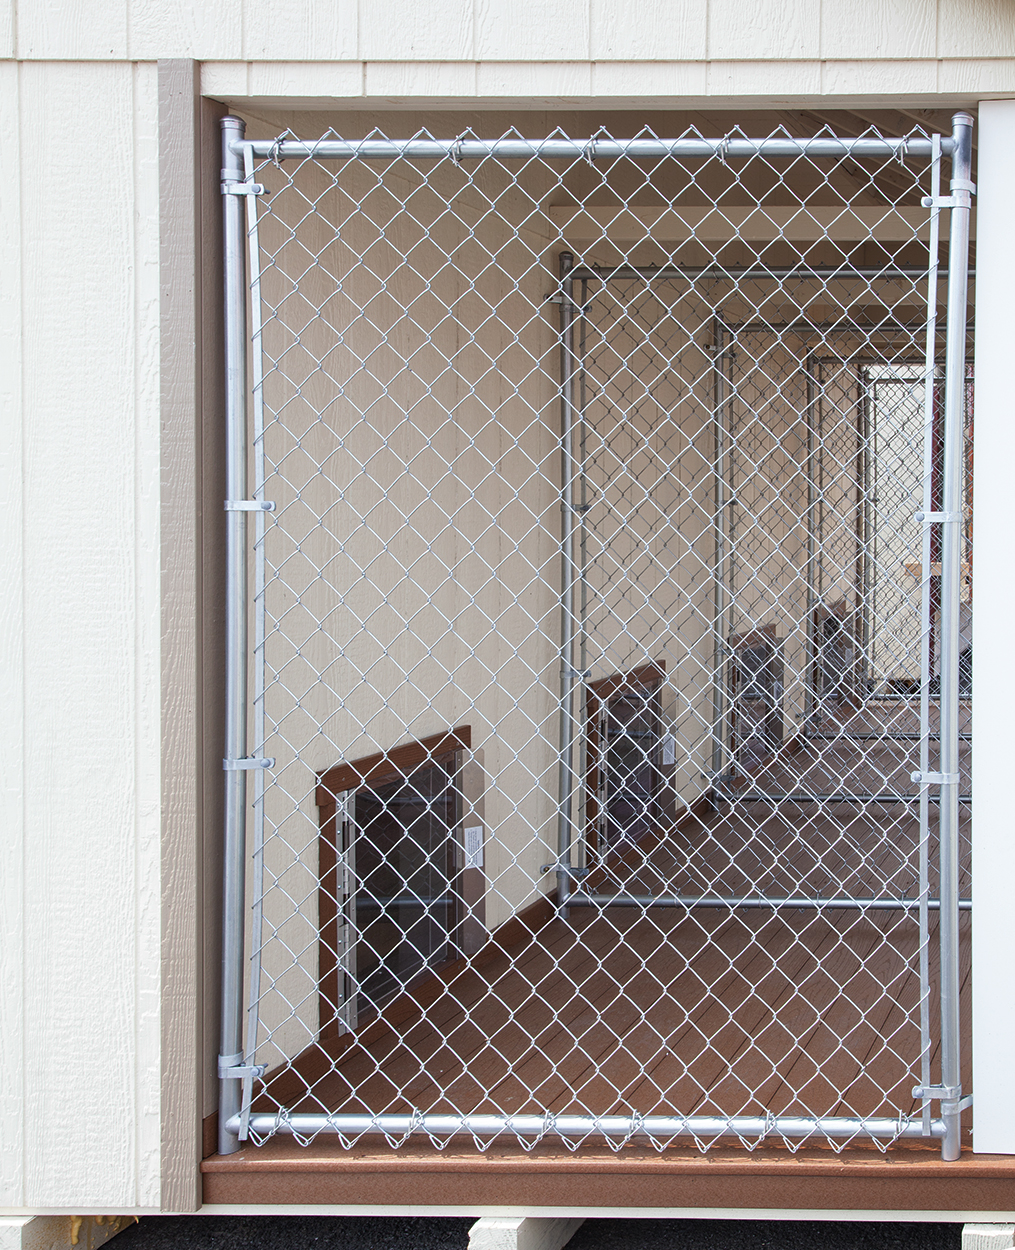 Interior of a 12x16 4 capacity dog kennel